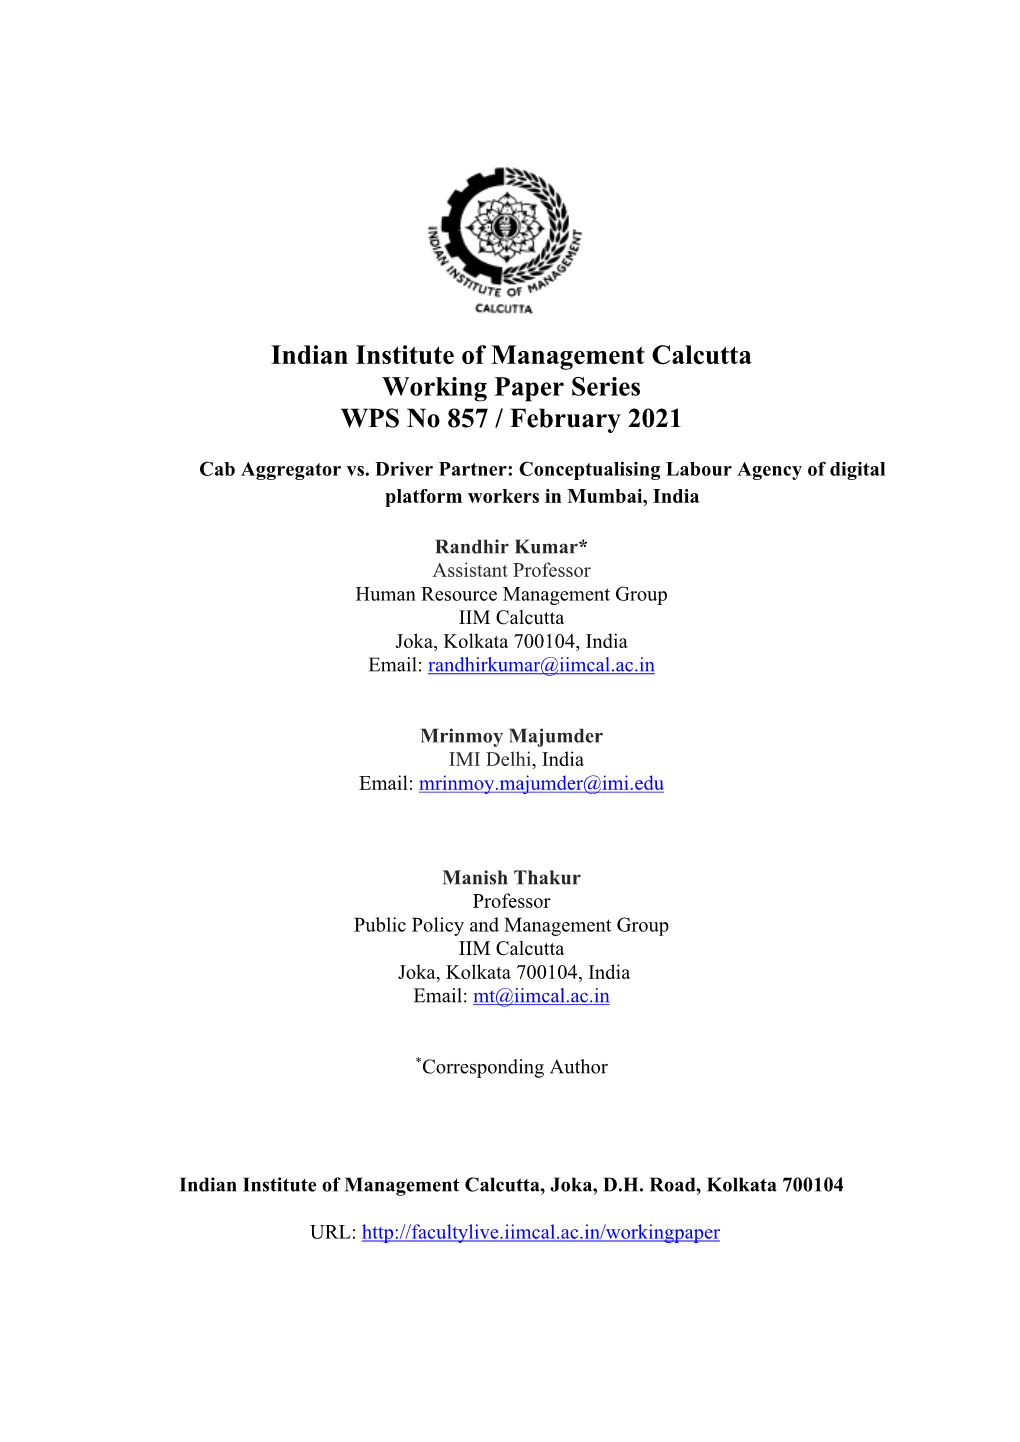 Indian Institute of Management Calcutta Working Paper Series WPS No 857 / February 2021